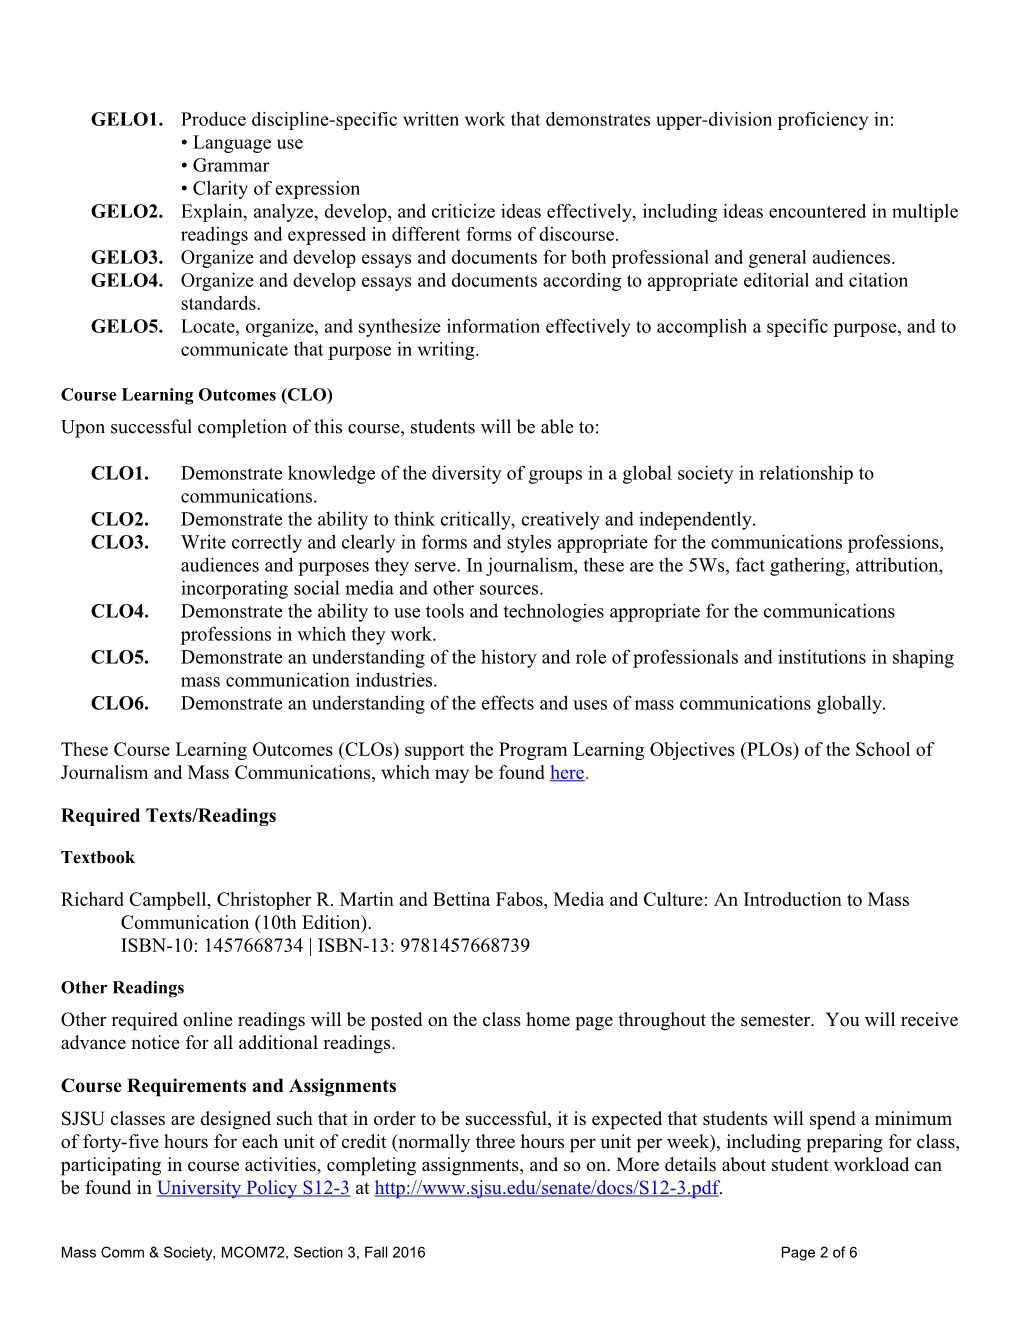 Accessible Syllabus Template s6